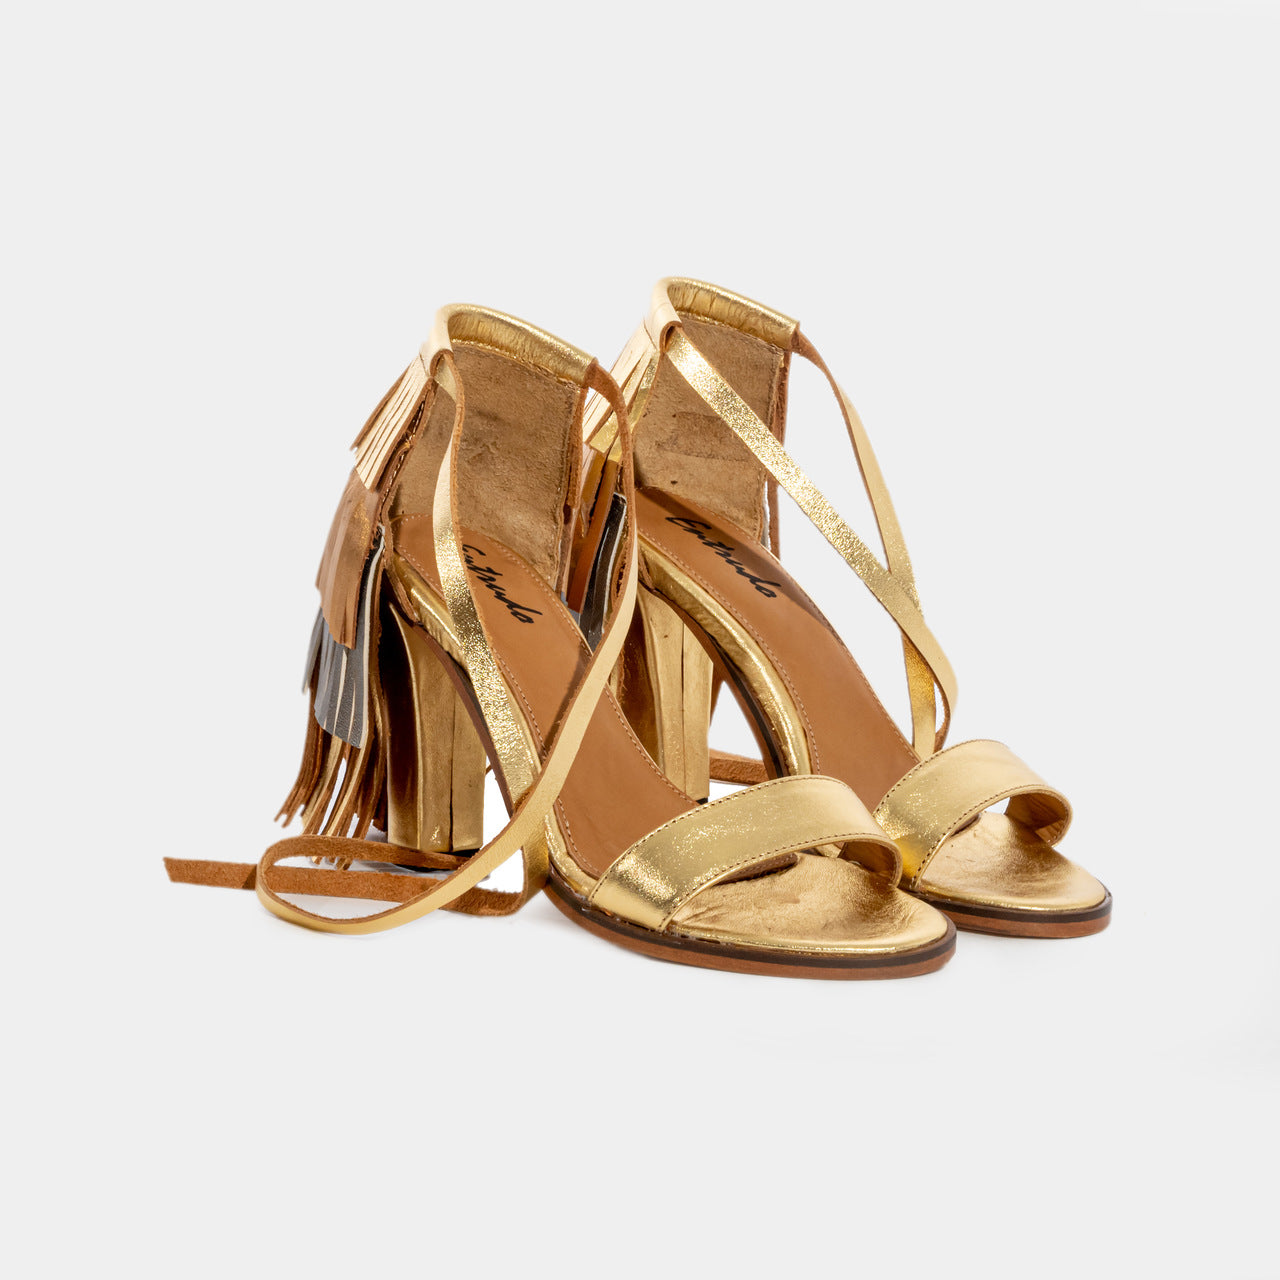 Lazarim - high heel sandals with fringes in gold and bronze